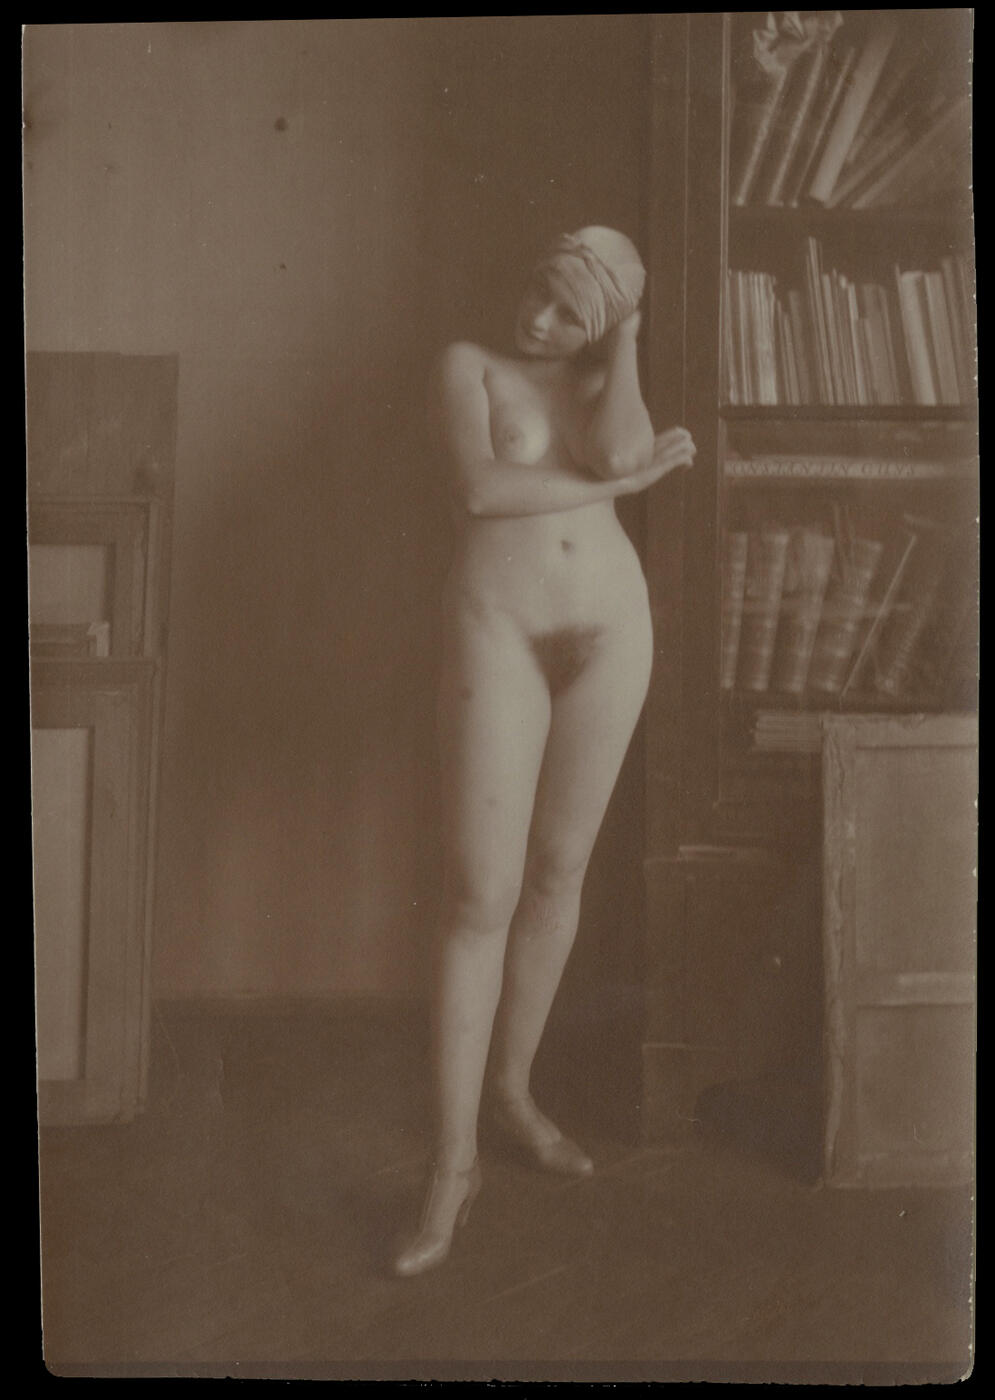 Standing Nude, Female Portrait, Seated Nude and Self-Portrait Boxing